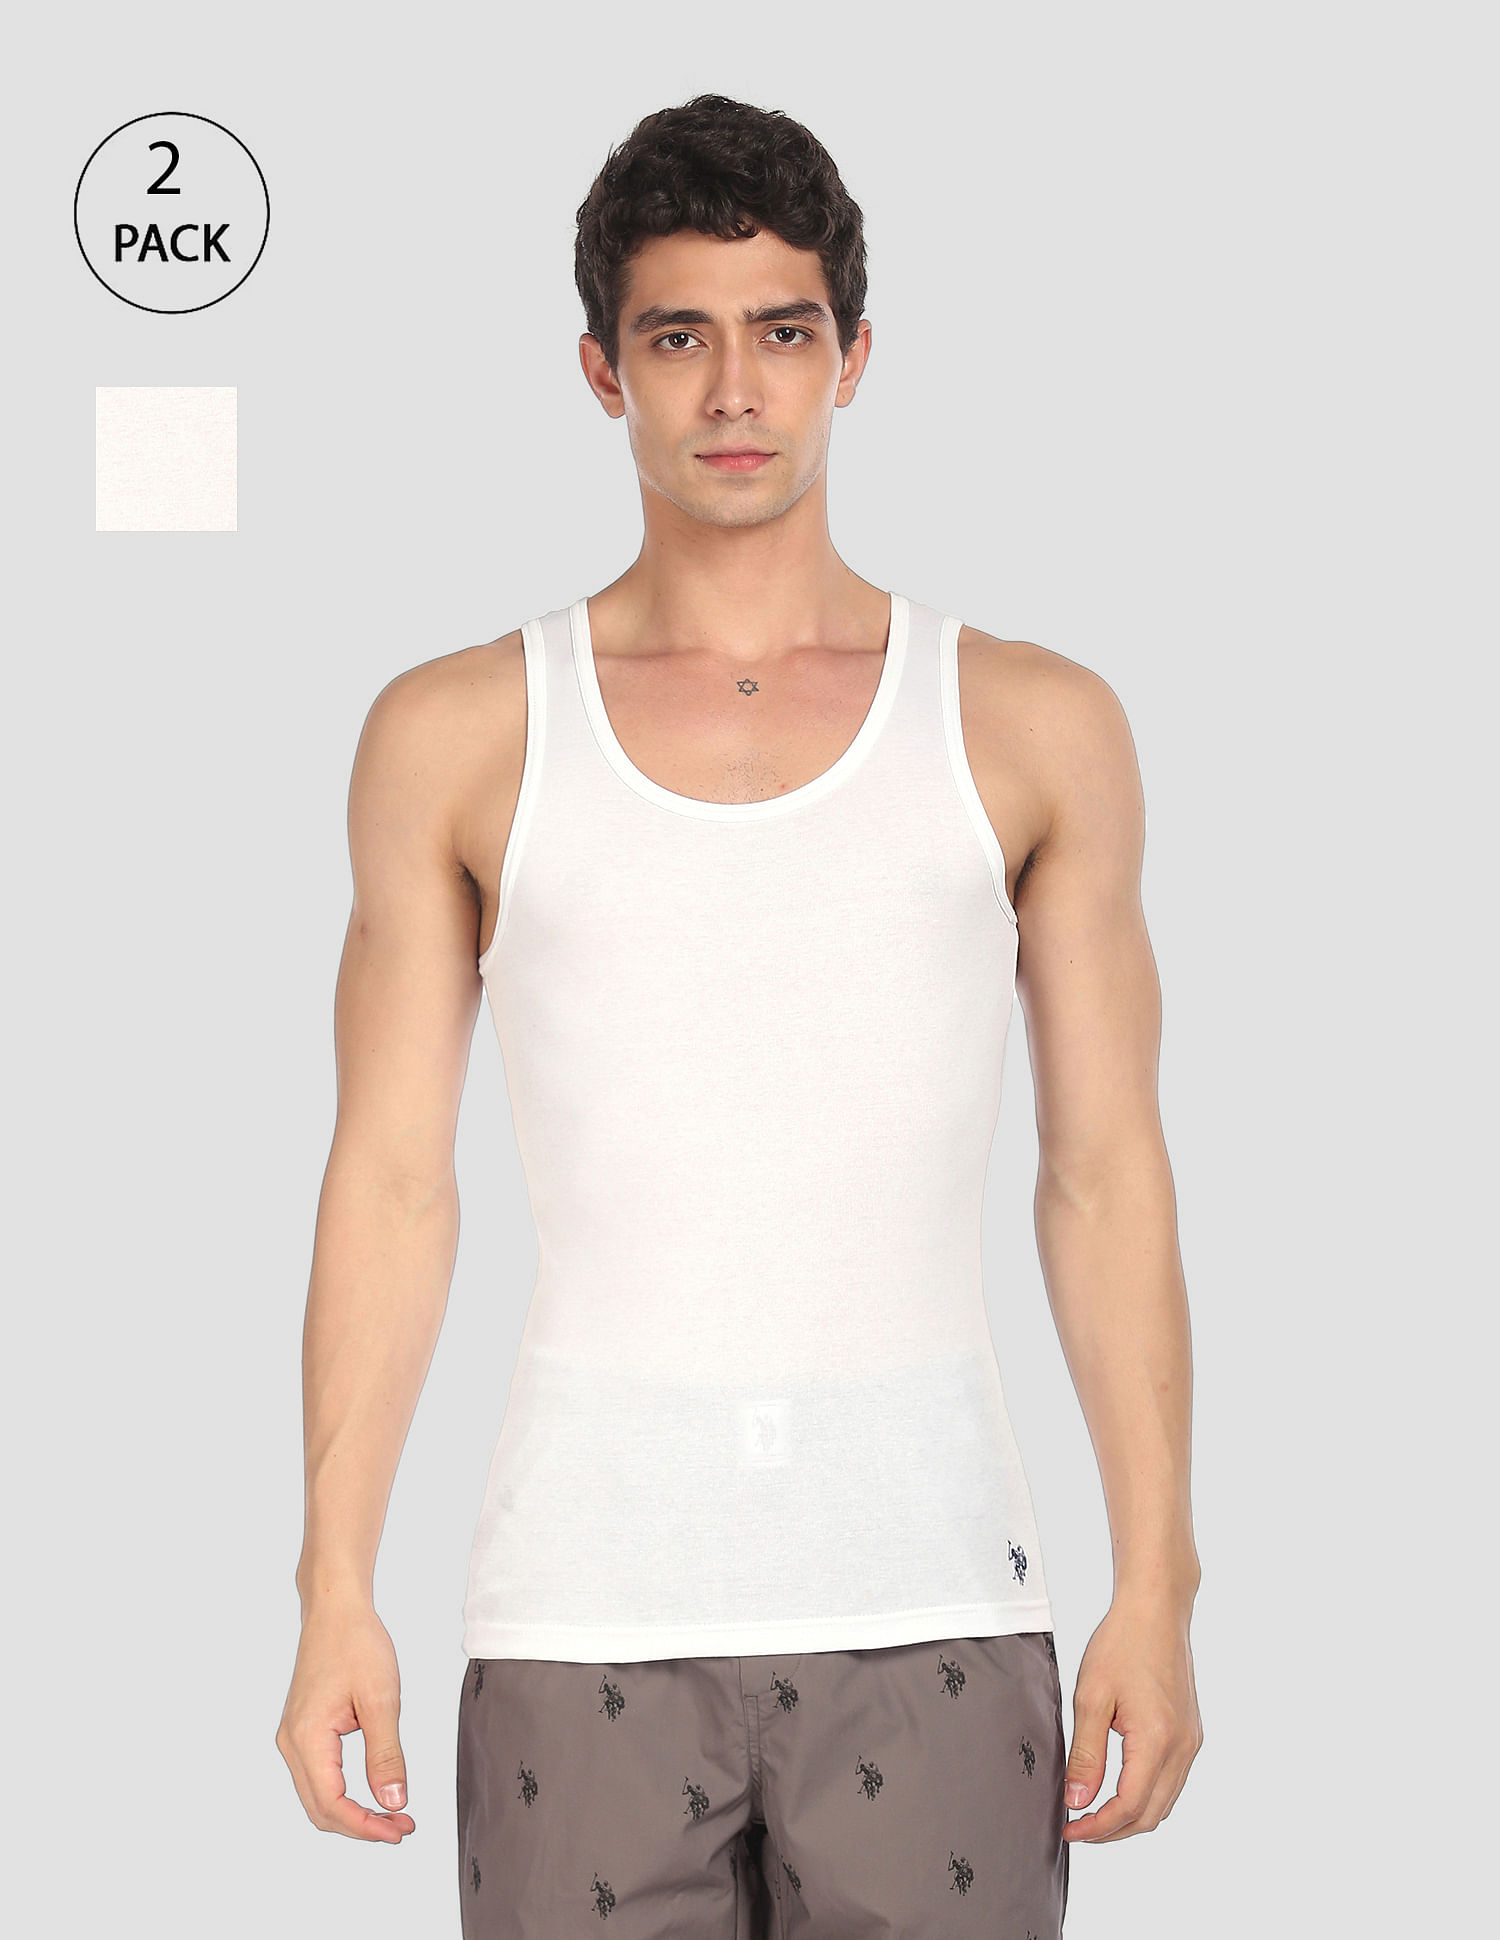 Buy USPA Innerwear Round Neck Solid Cotton I642 Vests - Pack Of 2